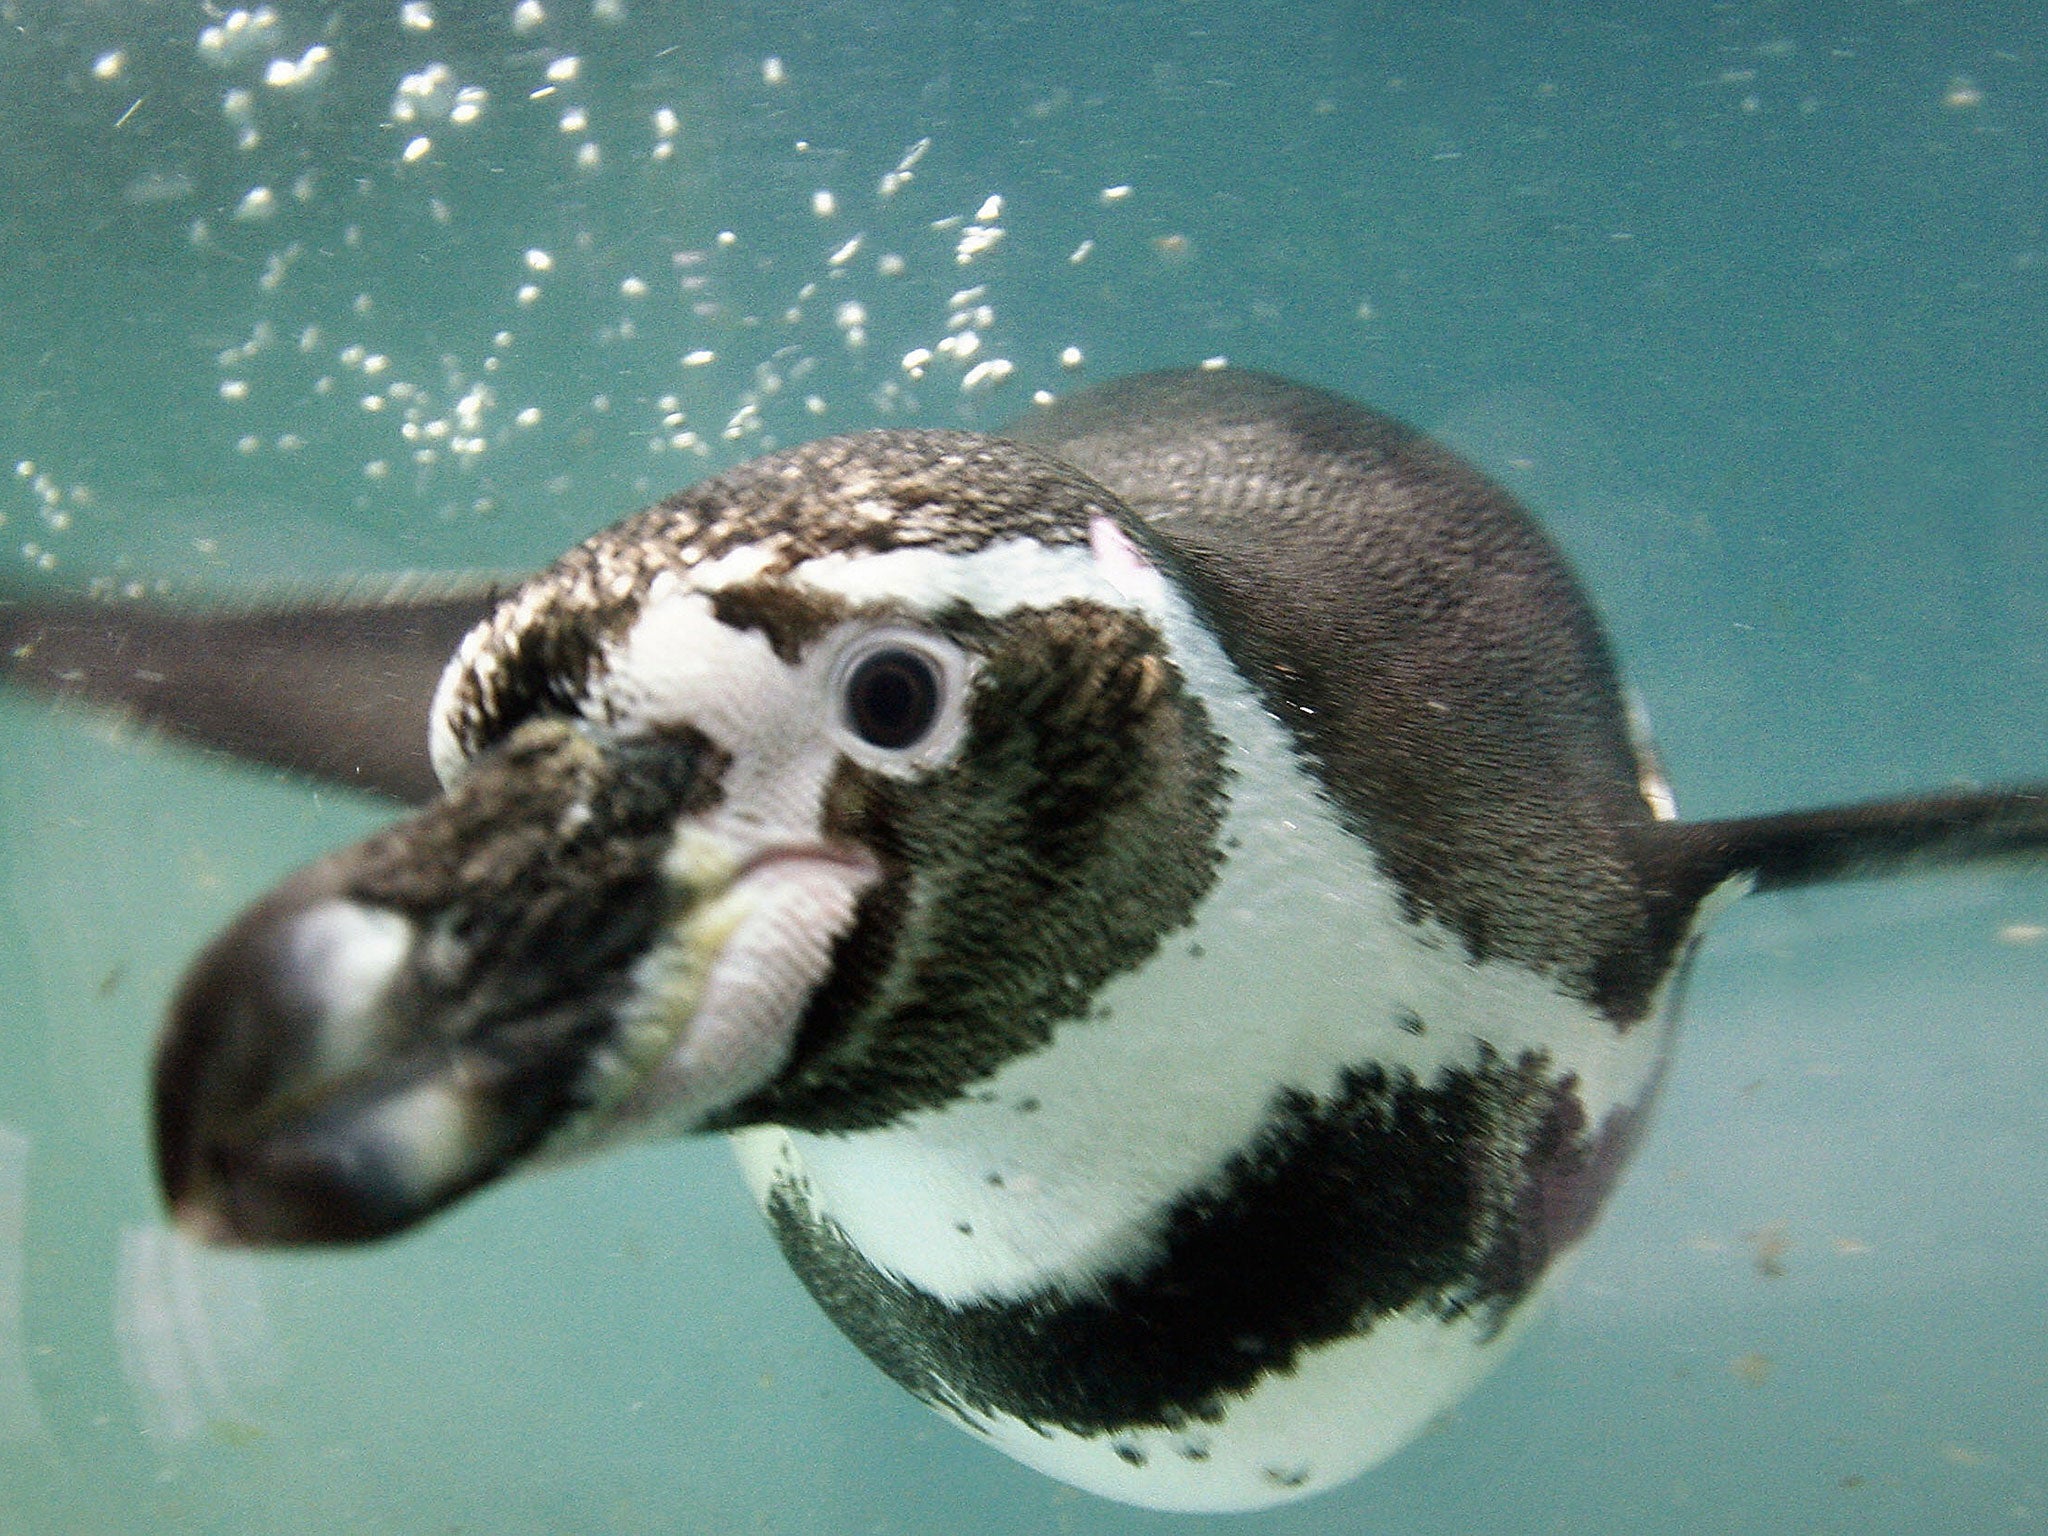 Two other penguins have gone missing from the zoo